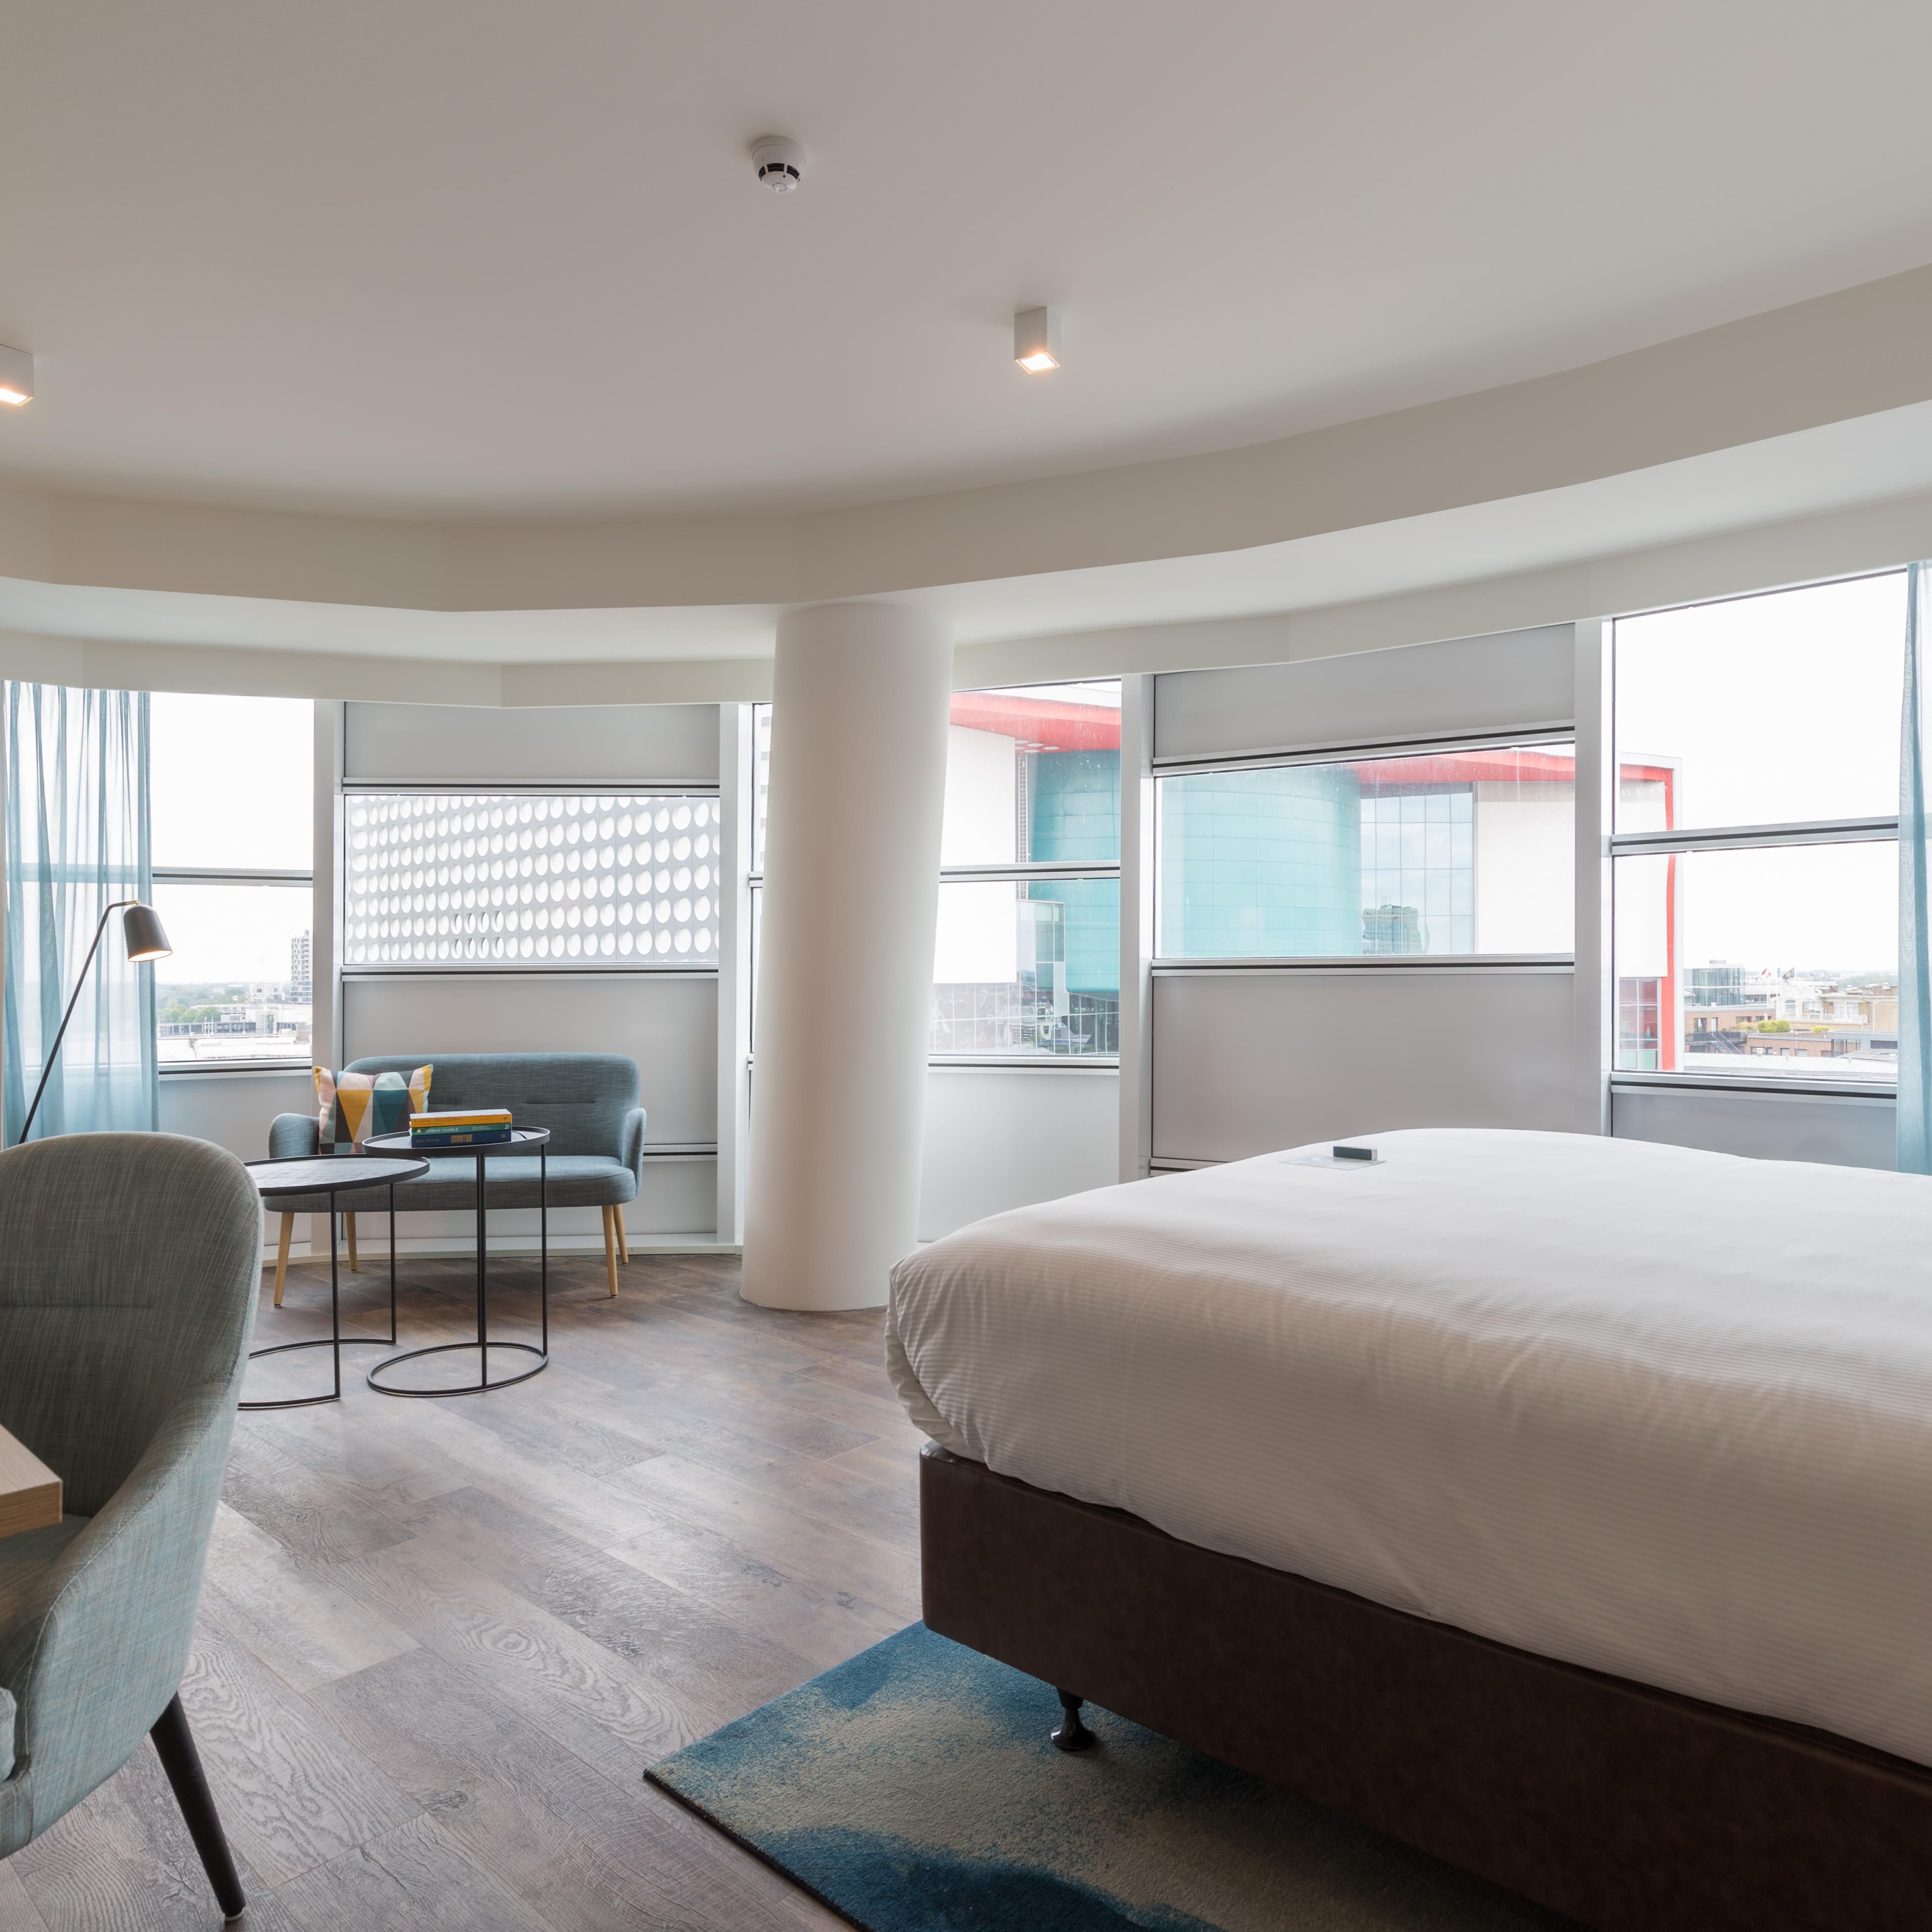 Our premium room offers more space with all the comfort you need